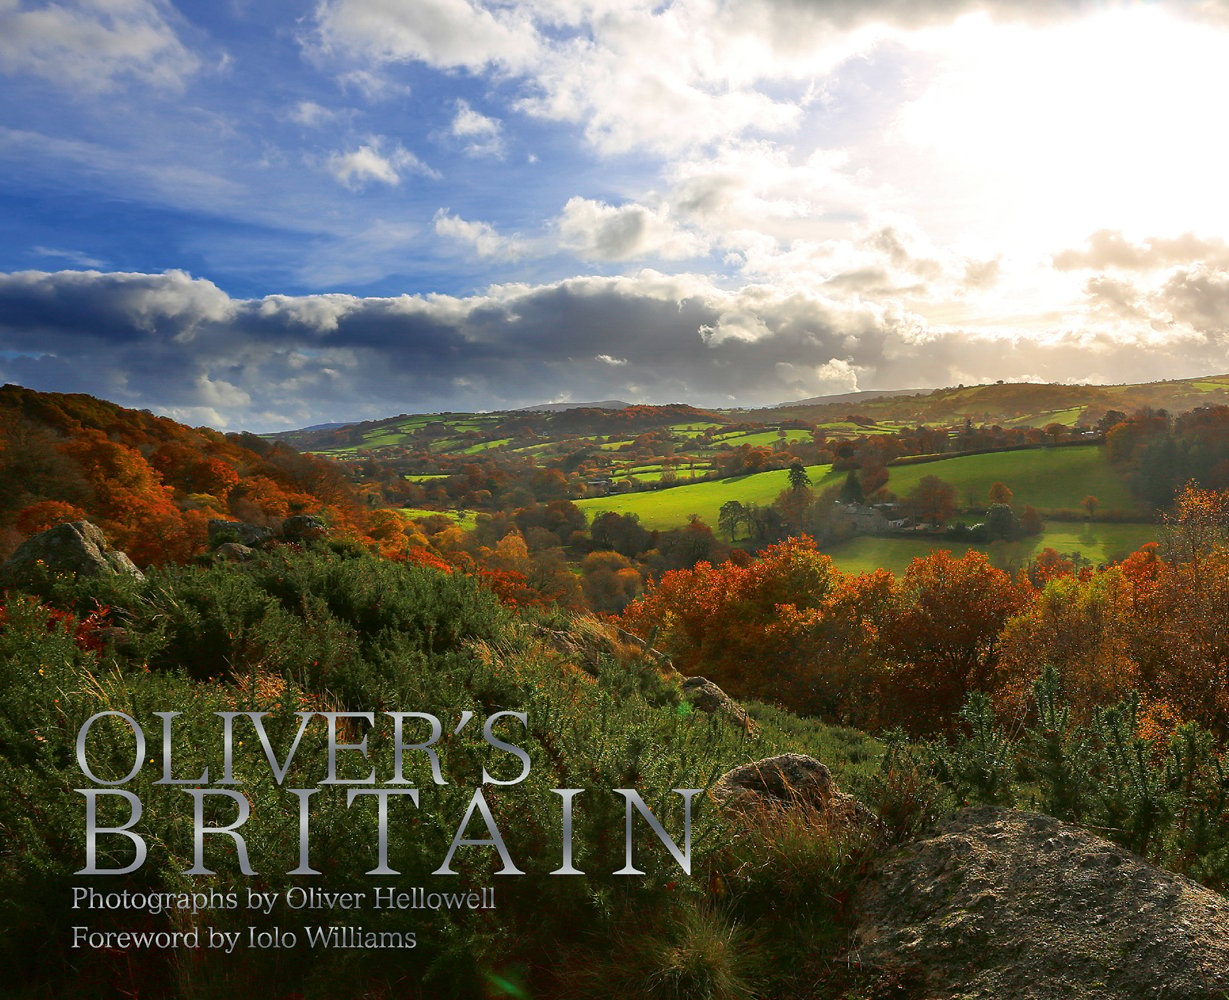 Vivid colour landscape photo of a hilly landscape in Britain with a blue cloudy sky and Oliver's Britain in silver capital letters